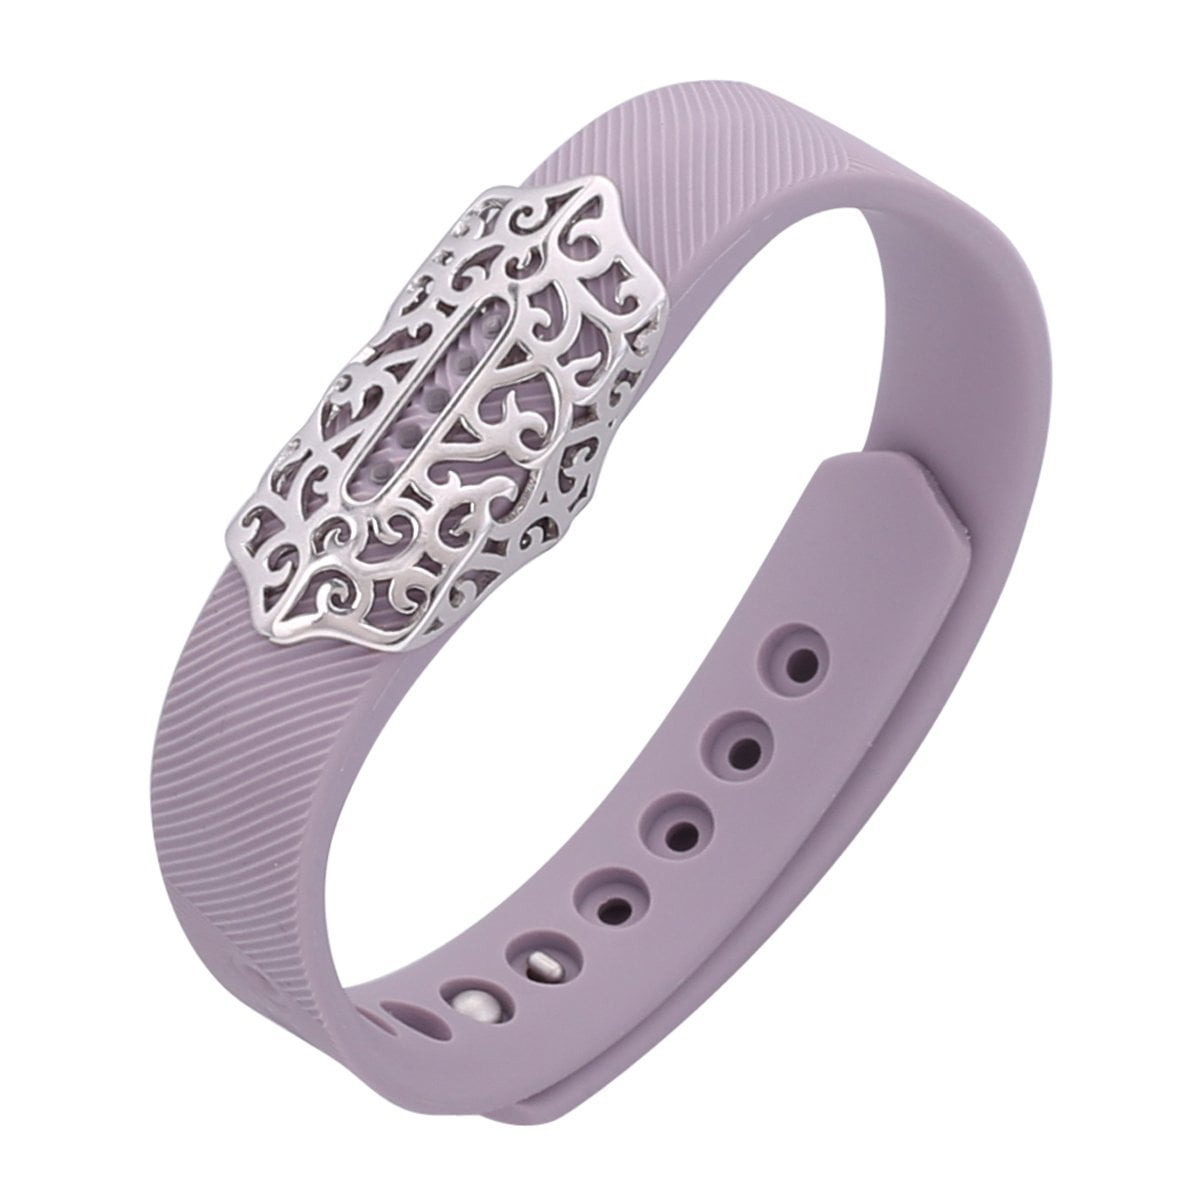 METAL JEWEL Band Cover Sleeve Protector Accessories for FITBIT FLEX 2 